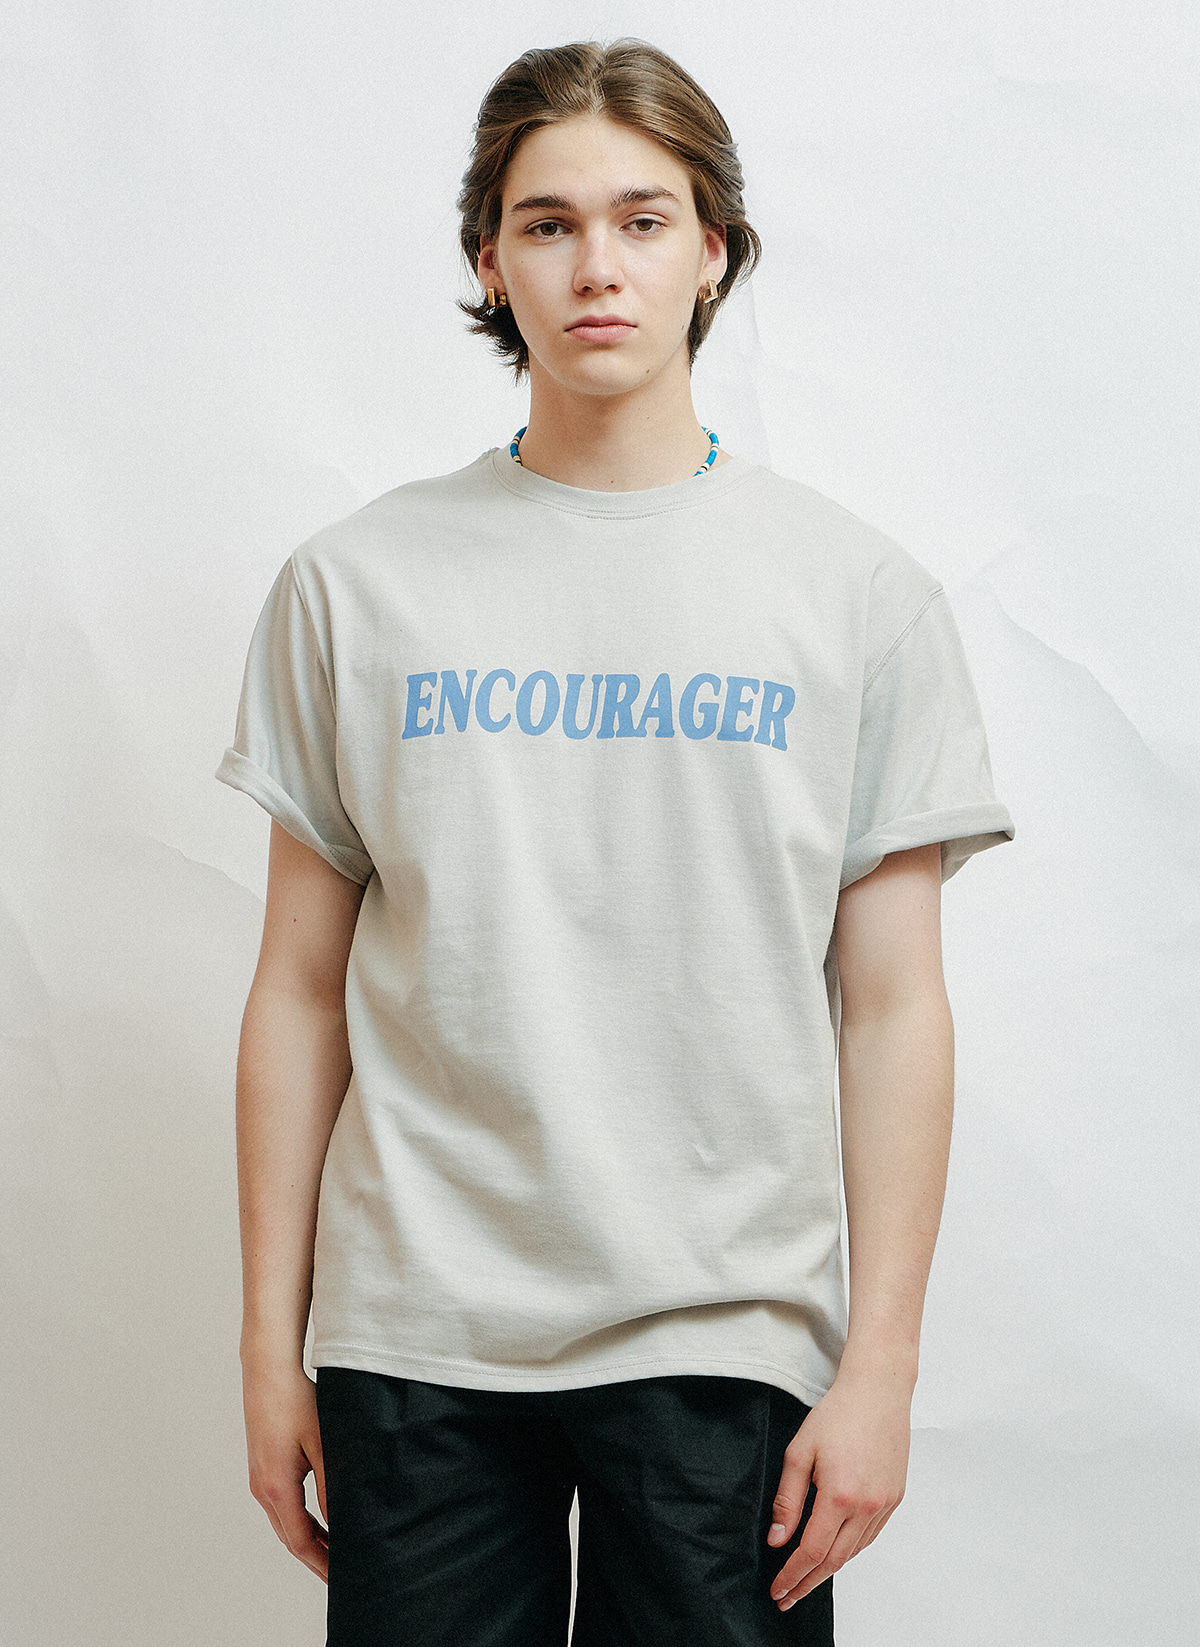 ENCOURAGER T-SHIRTS (GRAY)